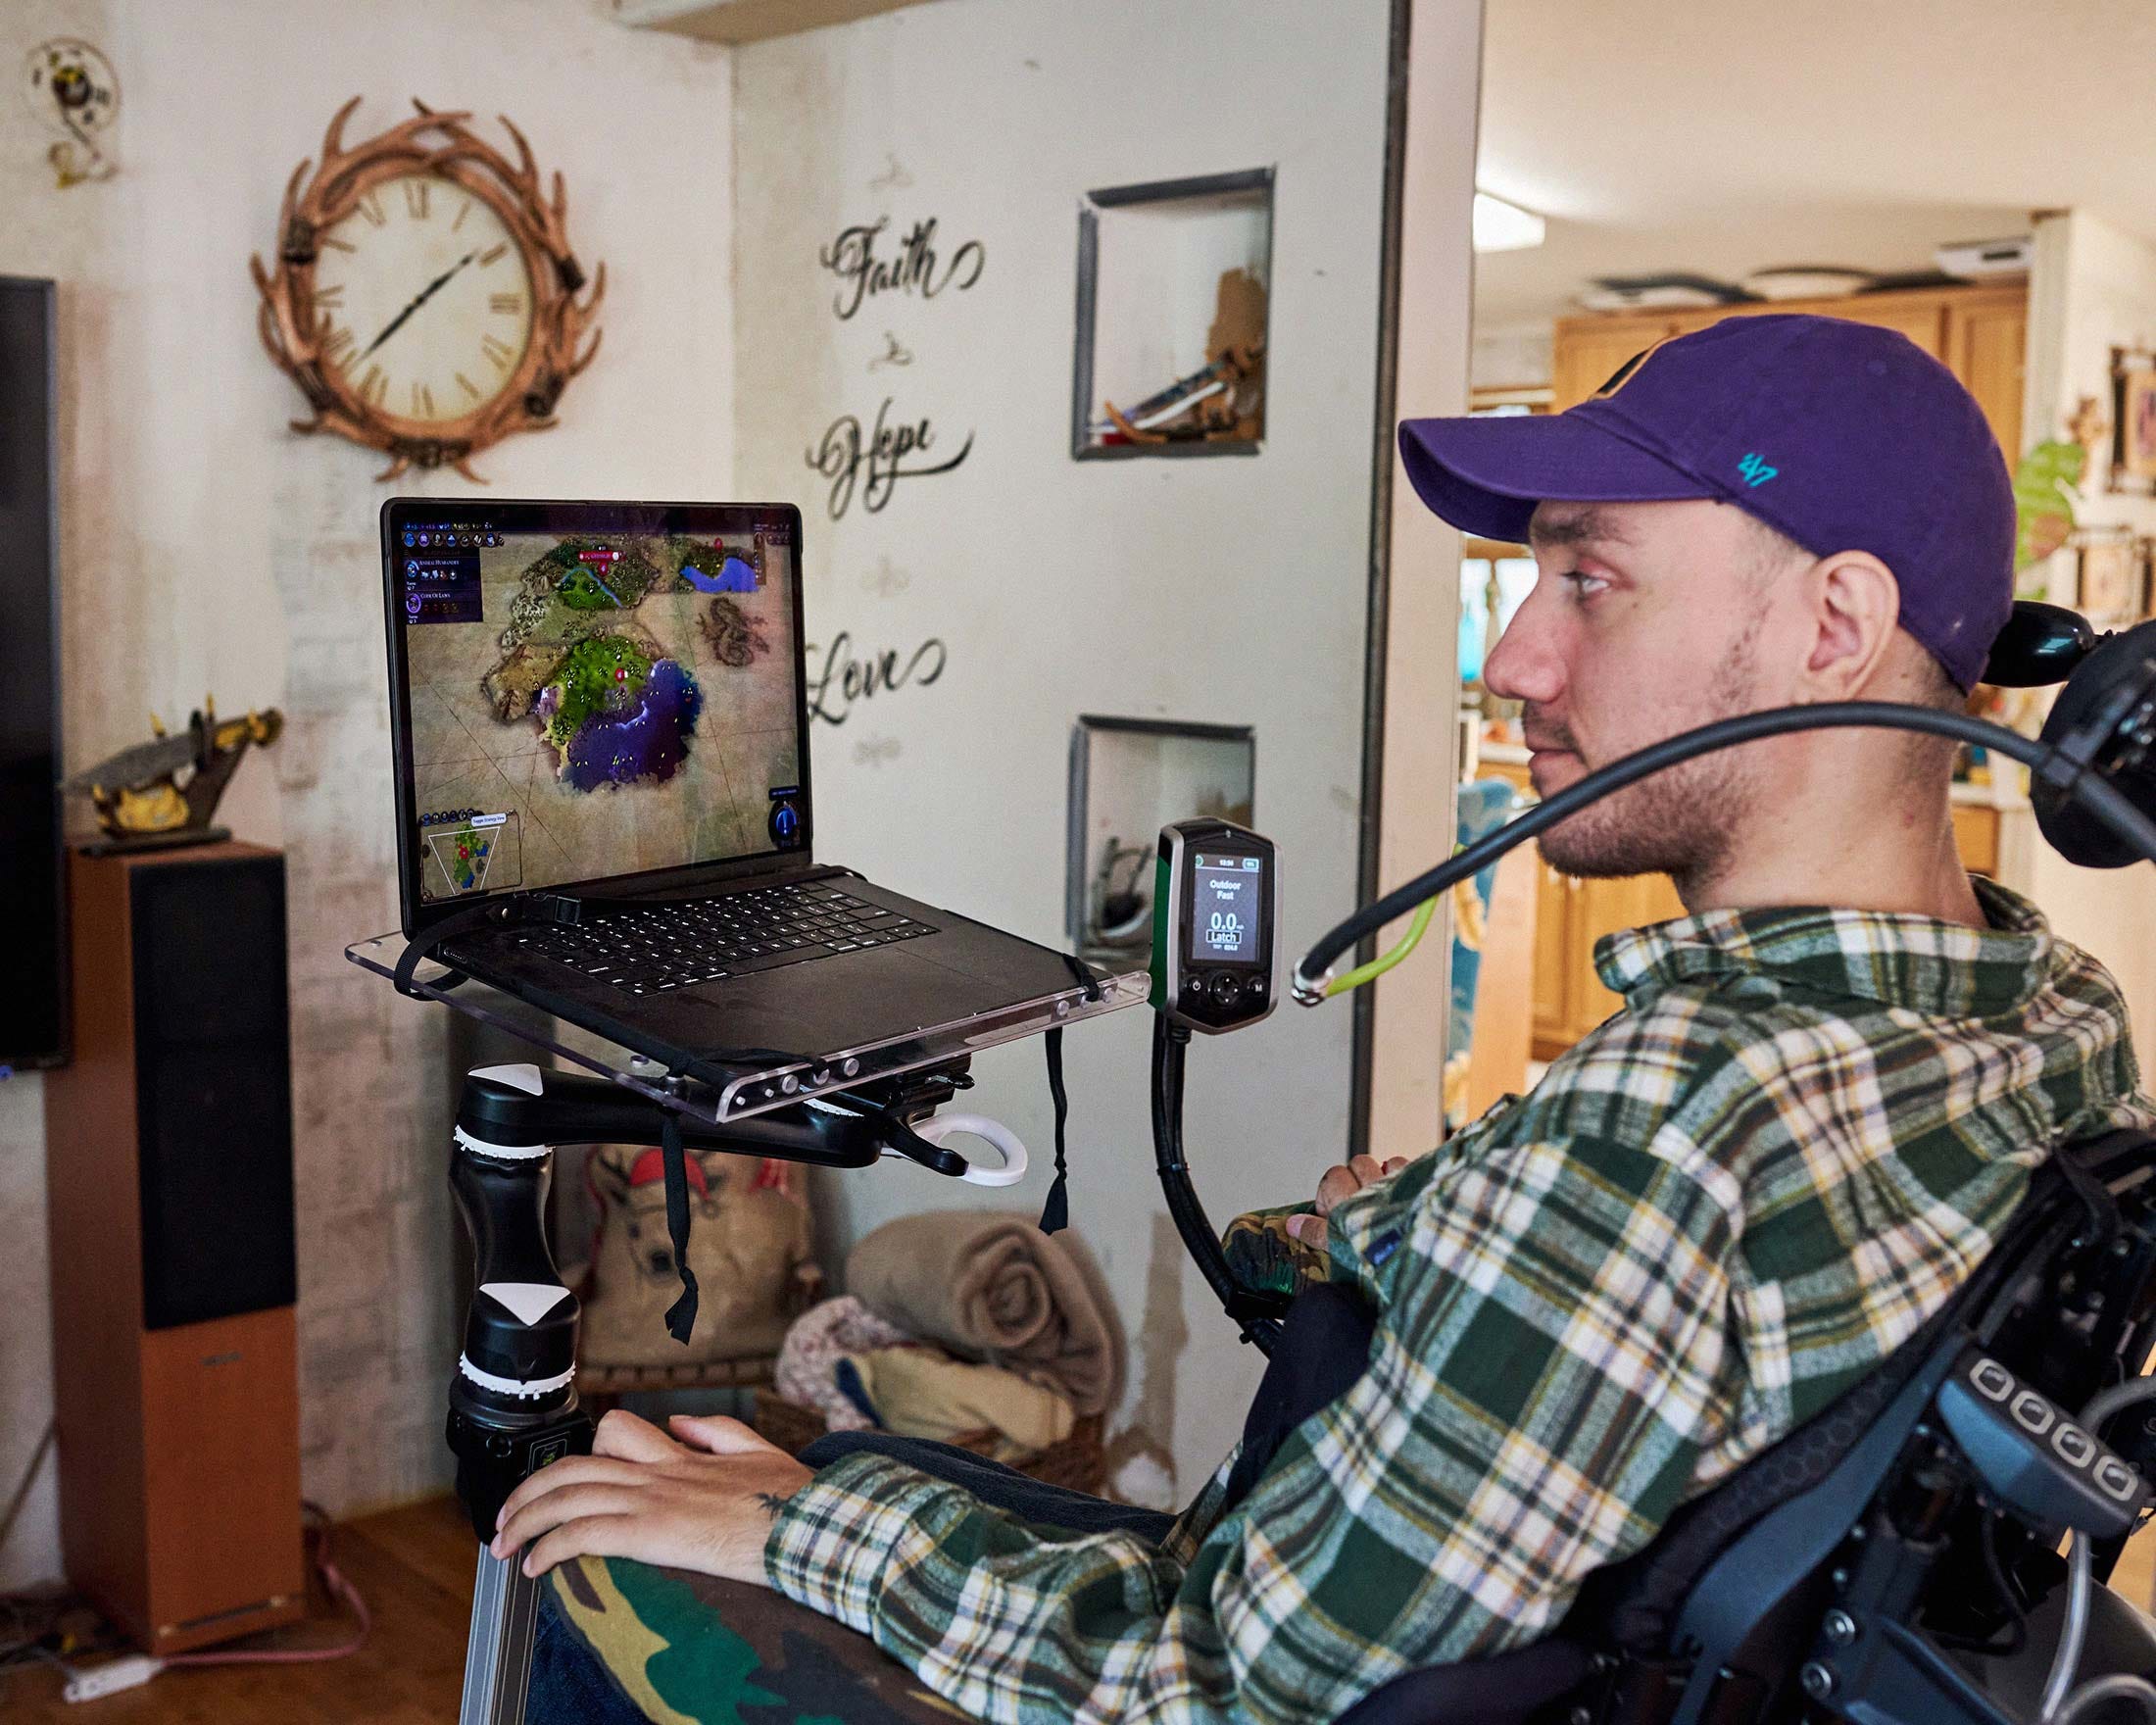 The implant allows Arbaugh to play computer games with relative ease.